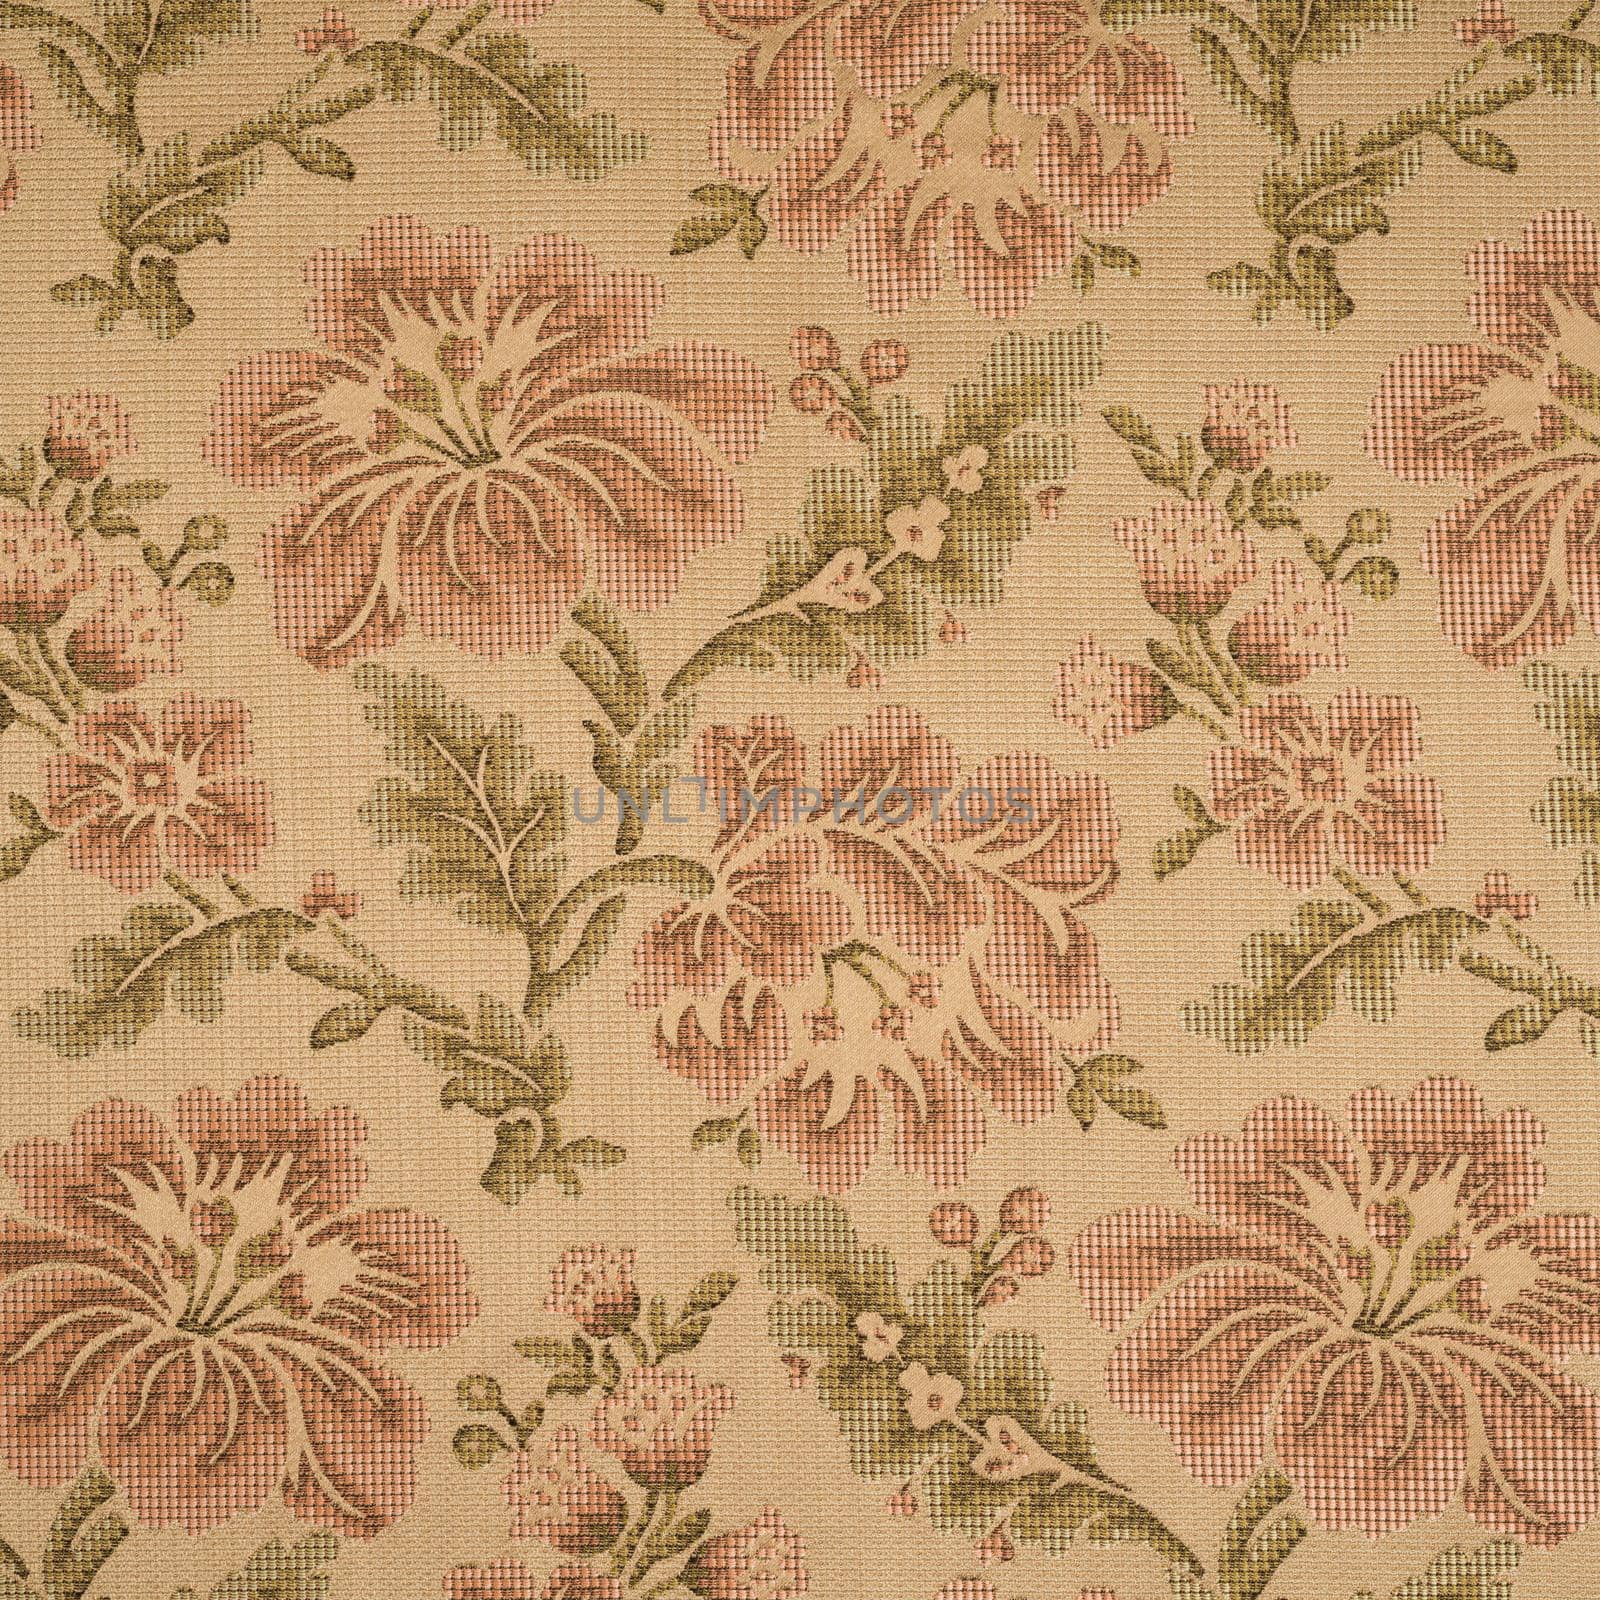 Fabric background with floral pattern by nikitabuida